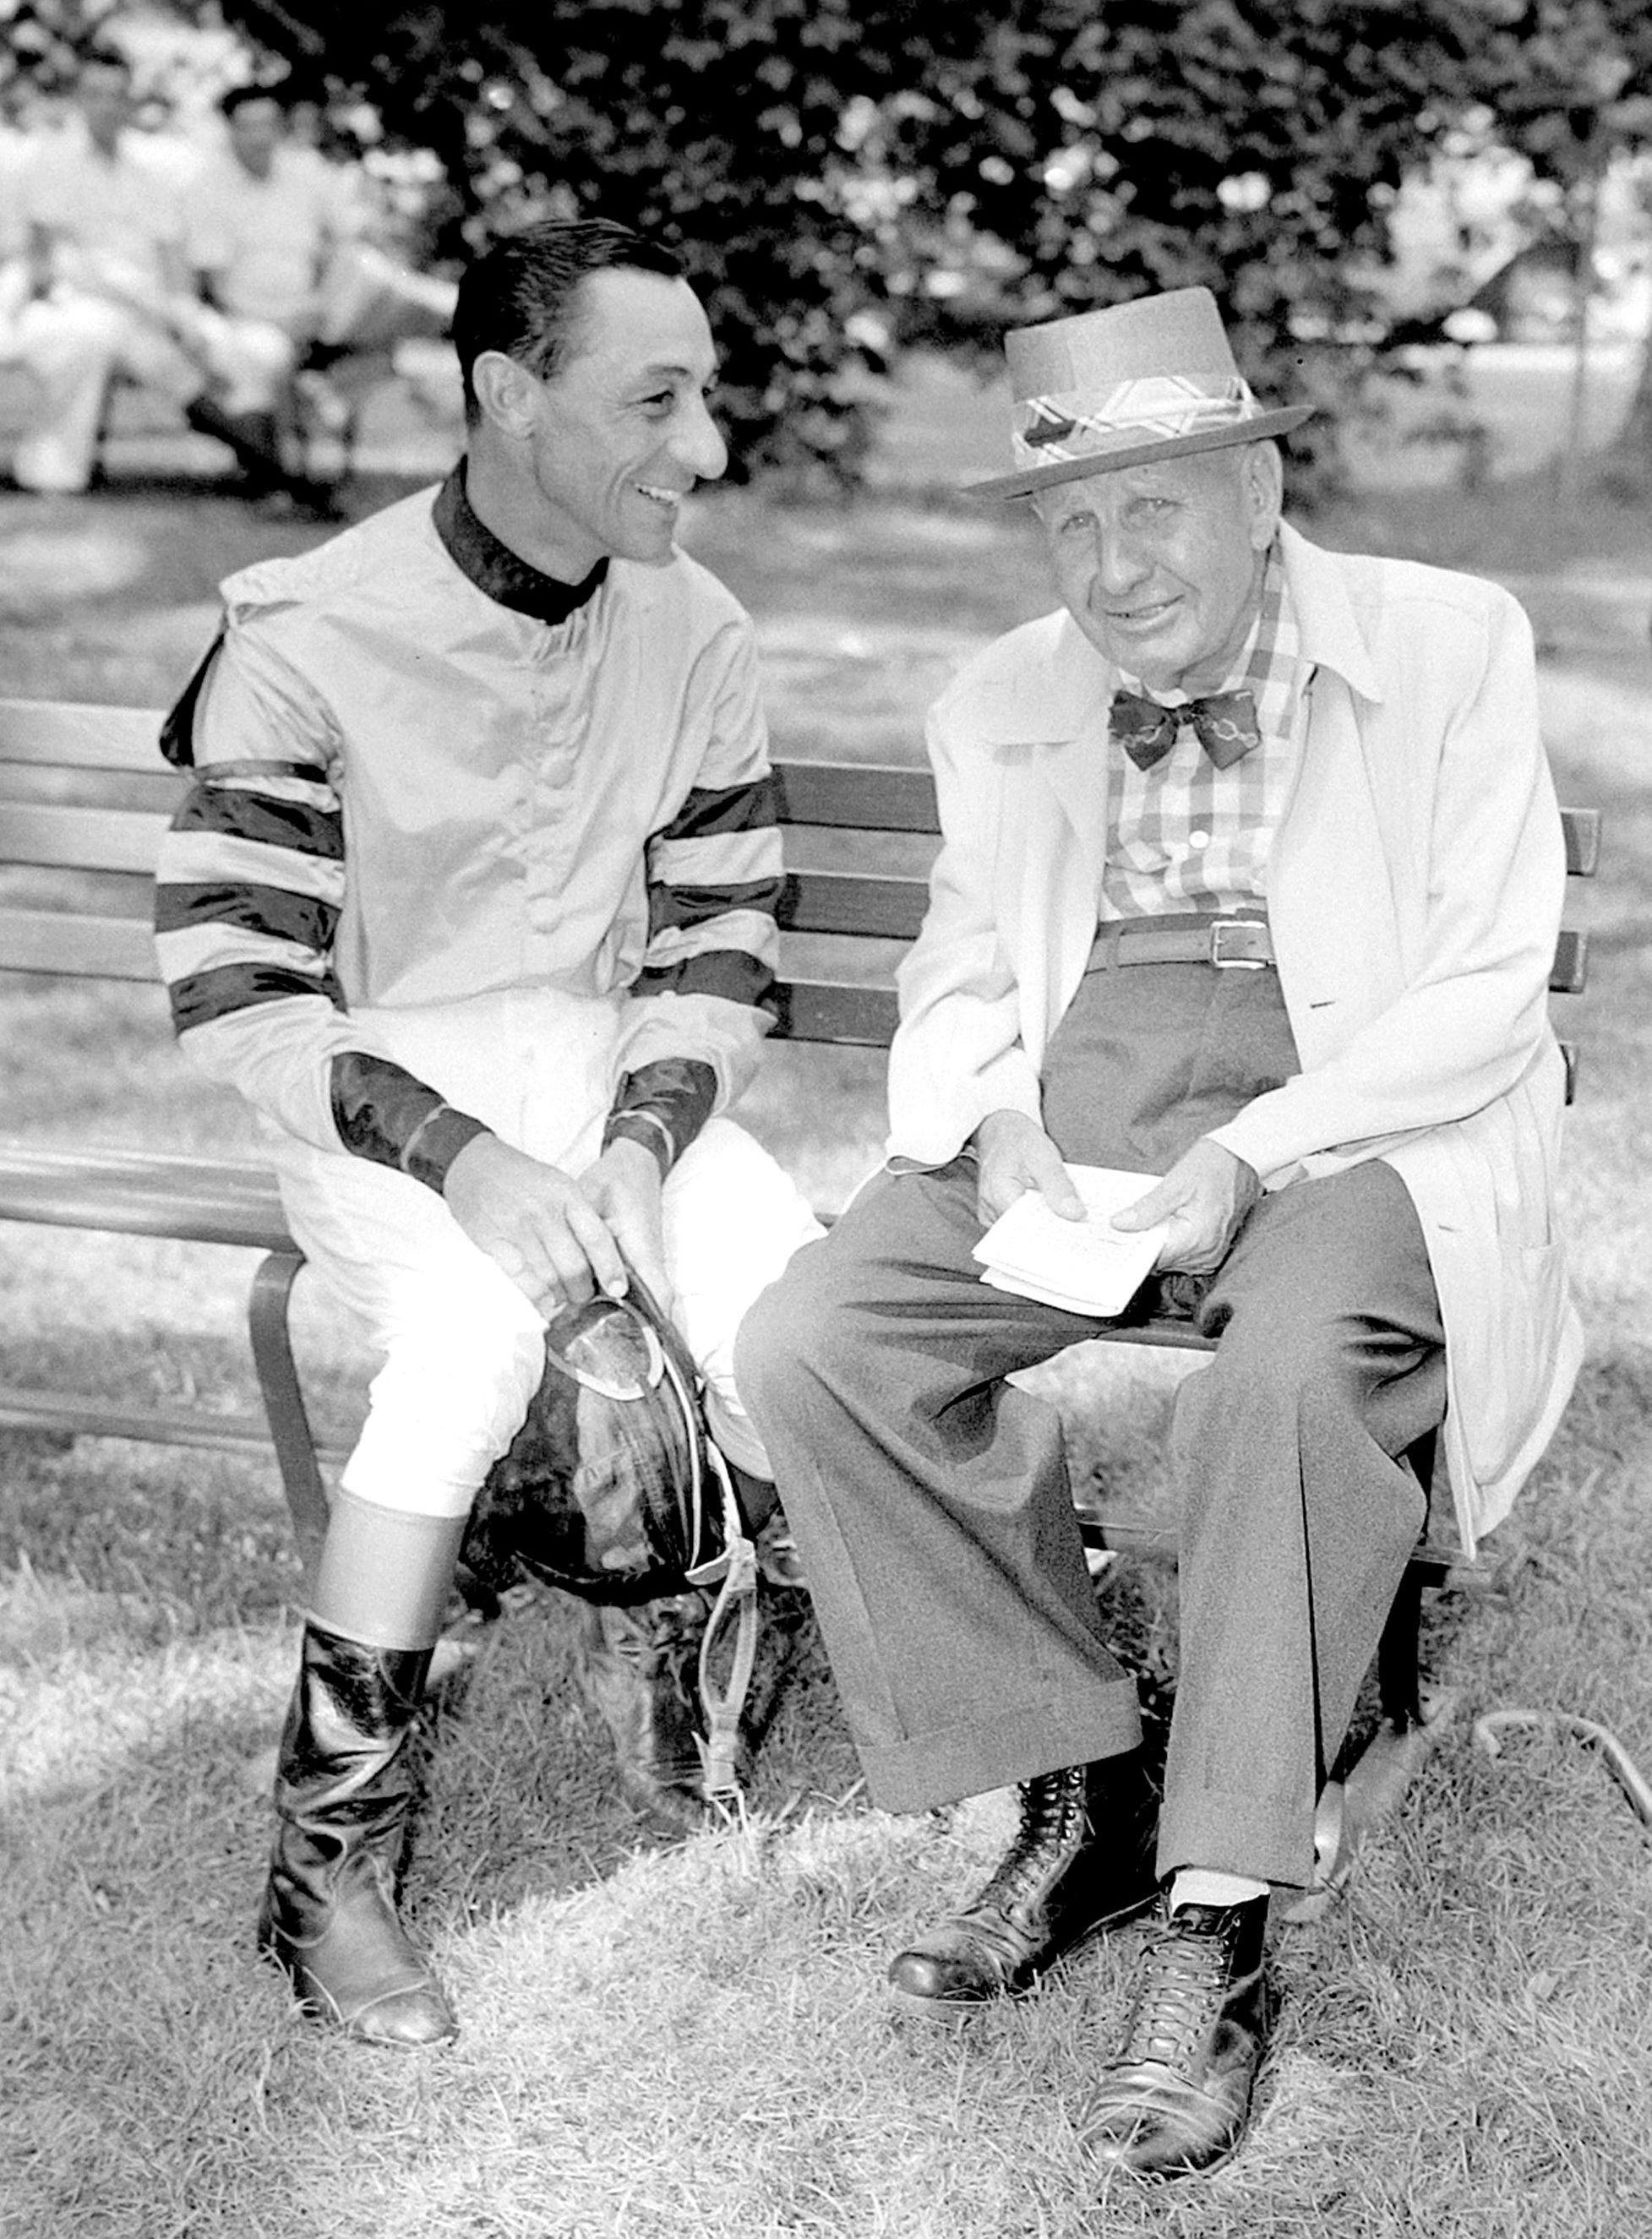 Eddie Arcaro, left, with James "Sunny Jim" Fitzsimmons (Keeneland Library Morgan Collection)